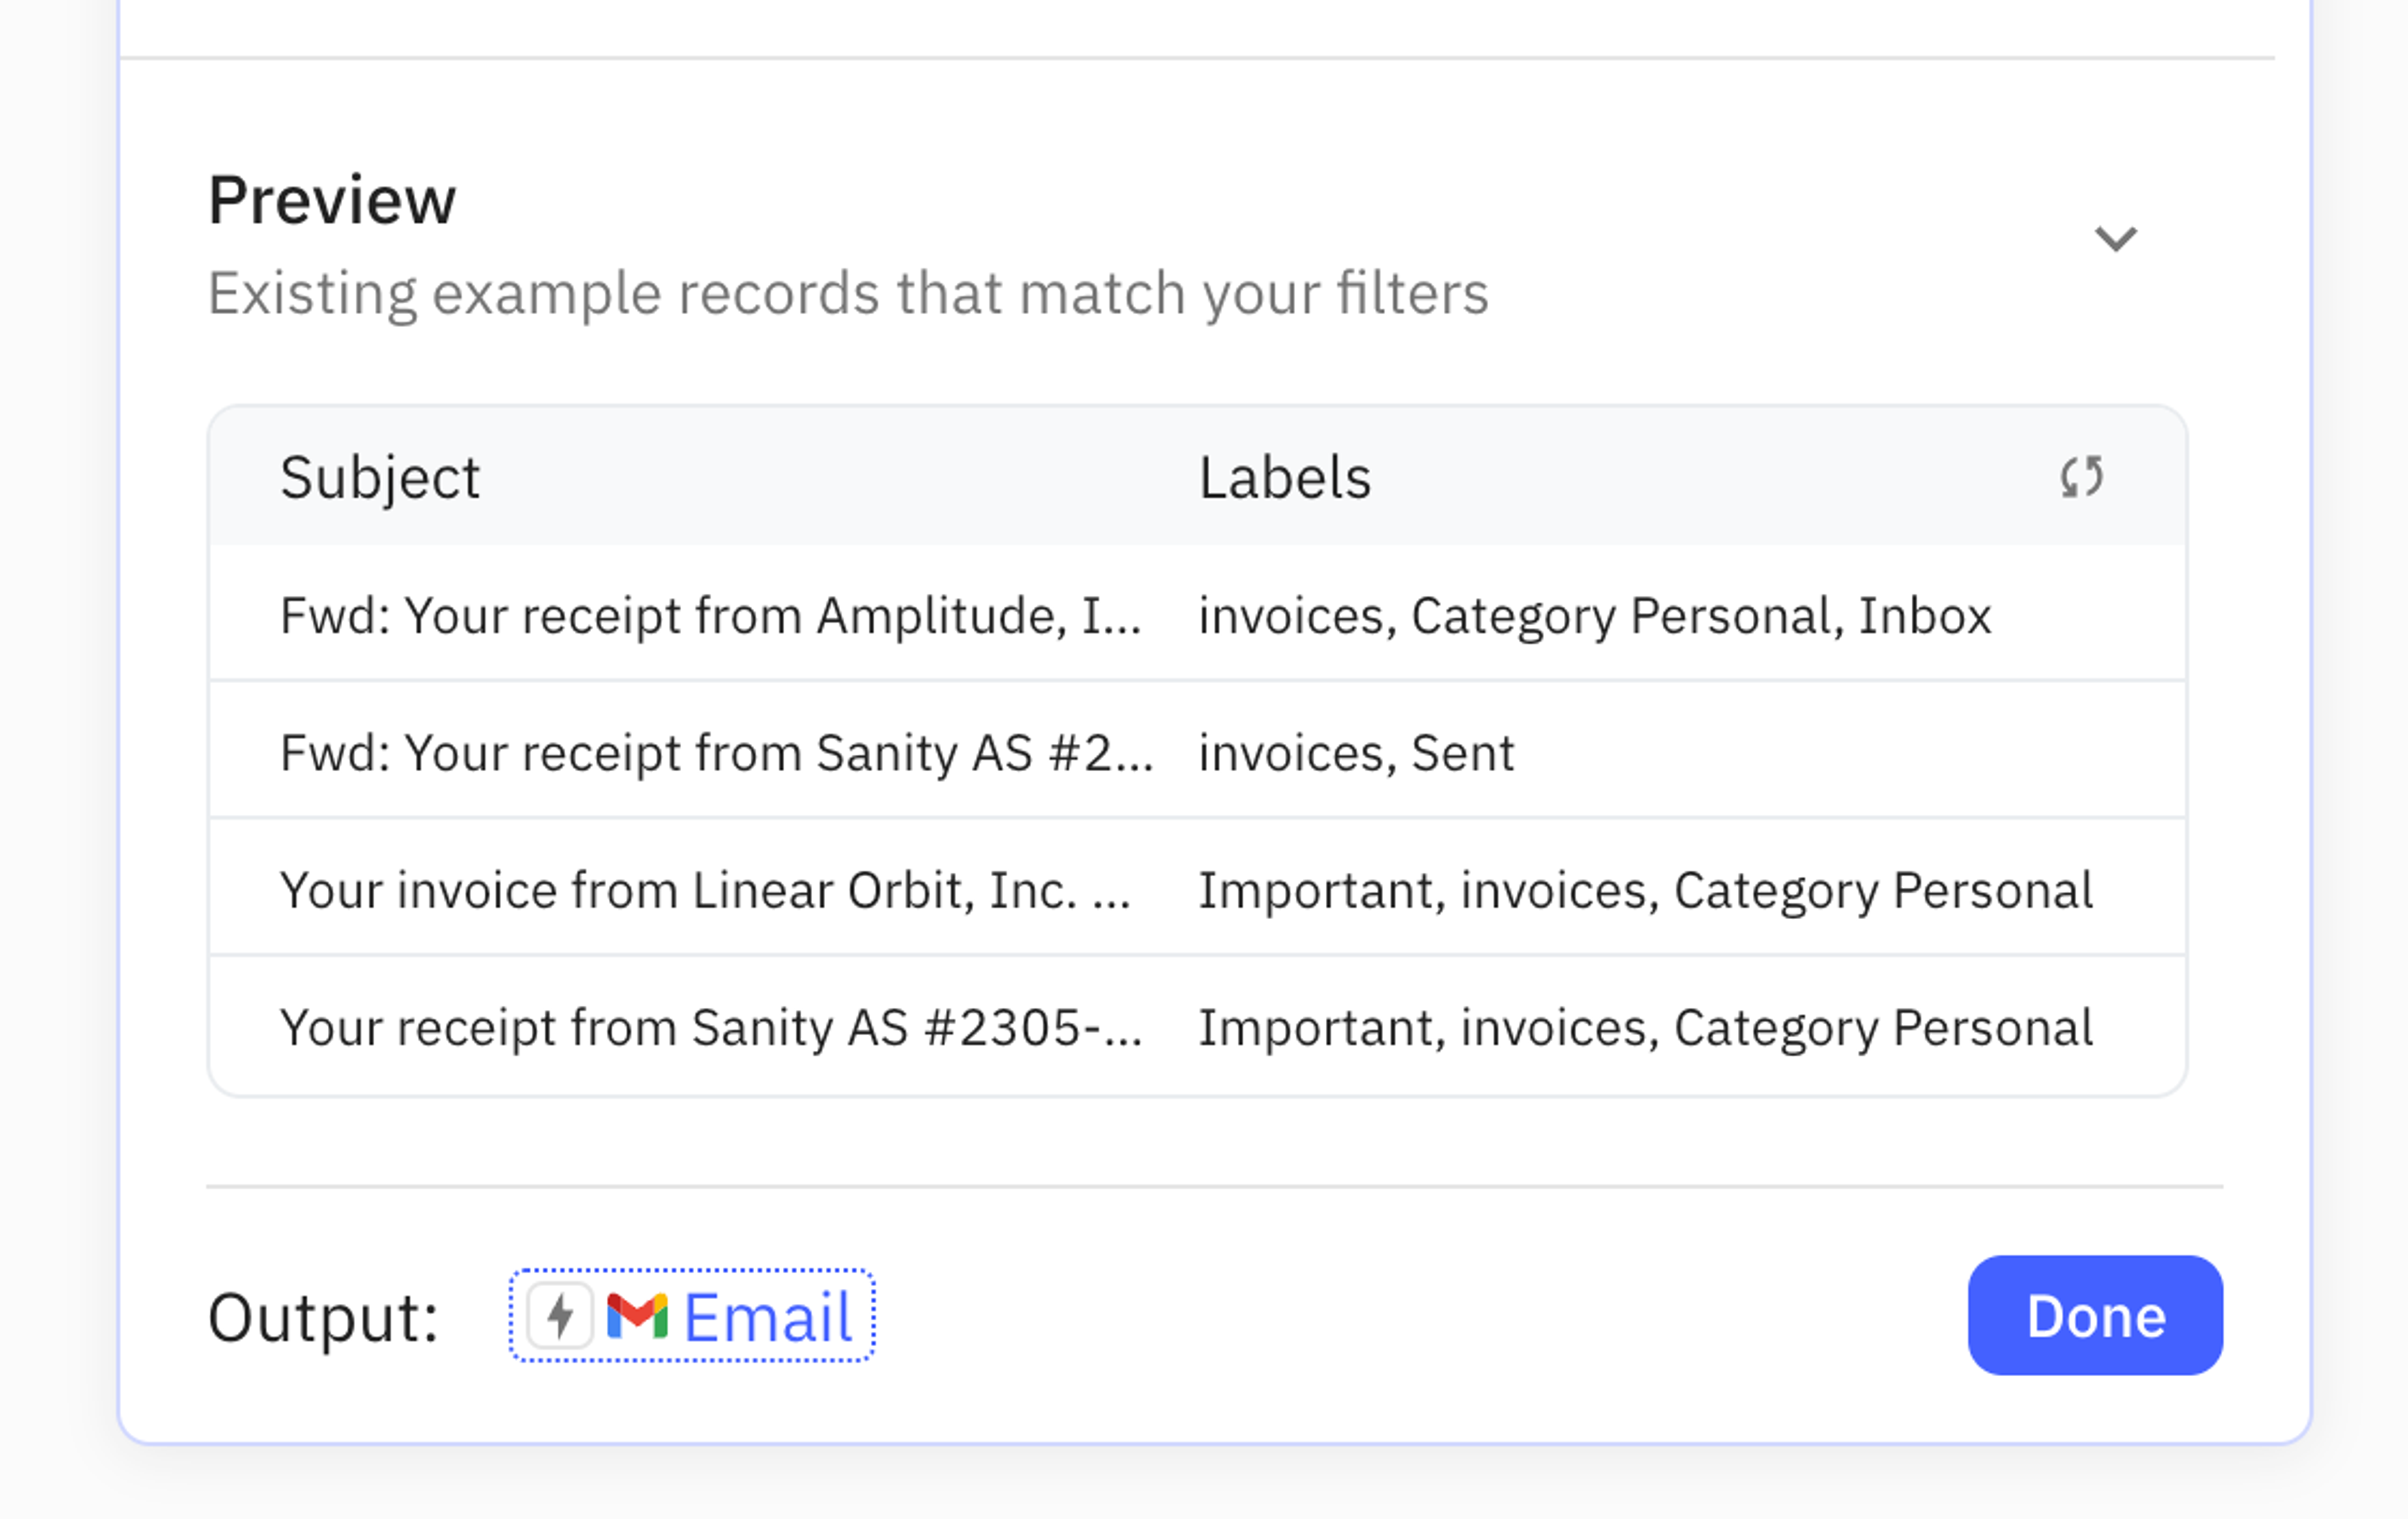 The 'Preview' section shows recent emails that match the specified trigger filters